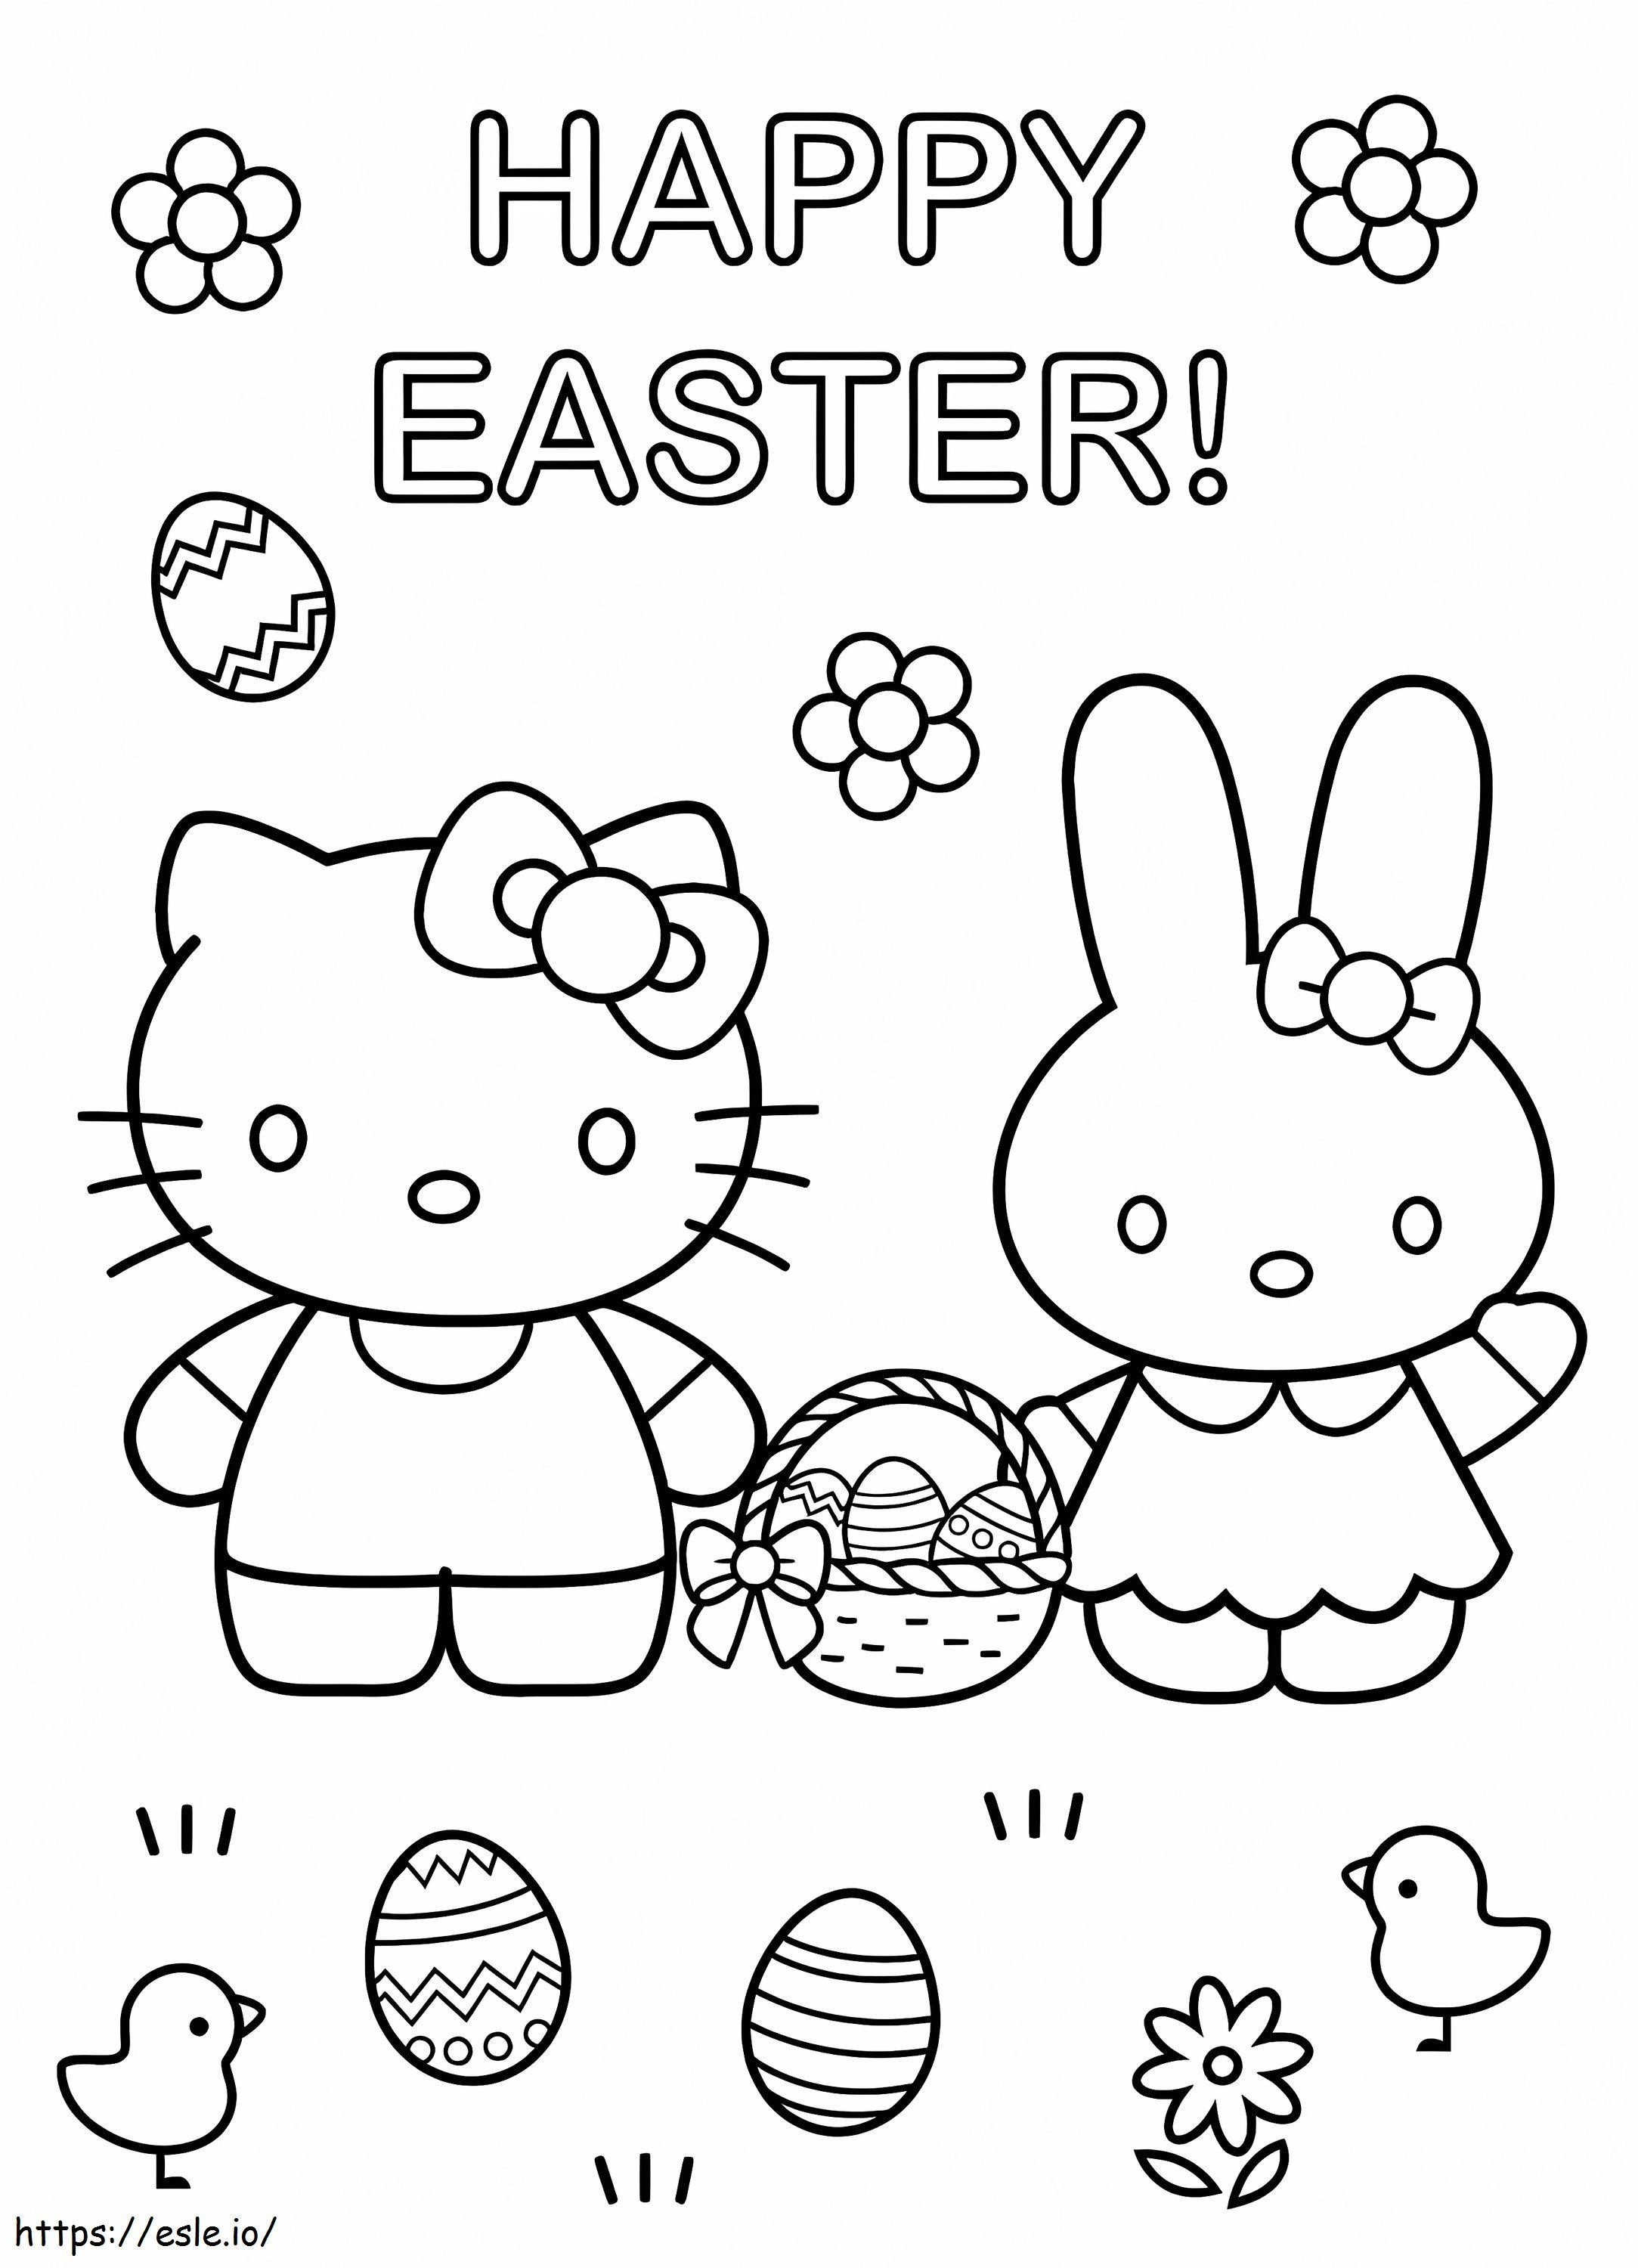 Happy Easter Hello Kitty coloring page